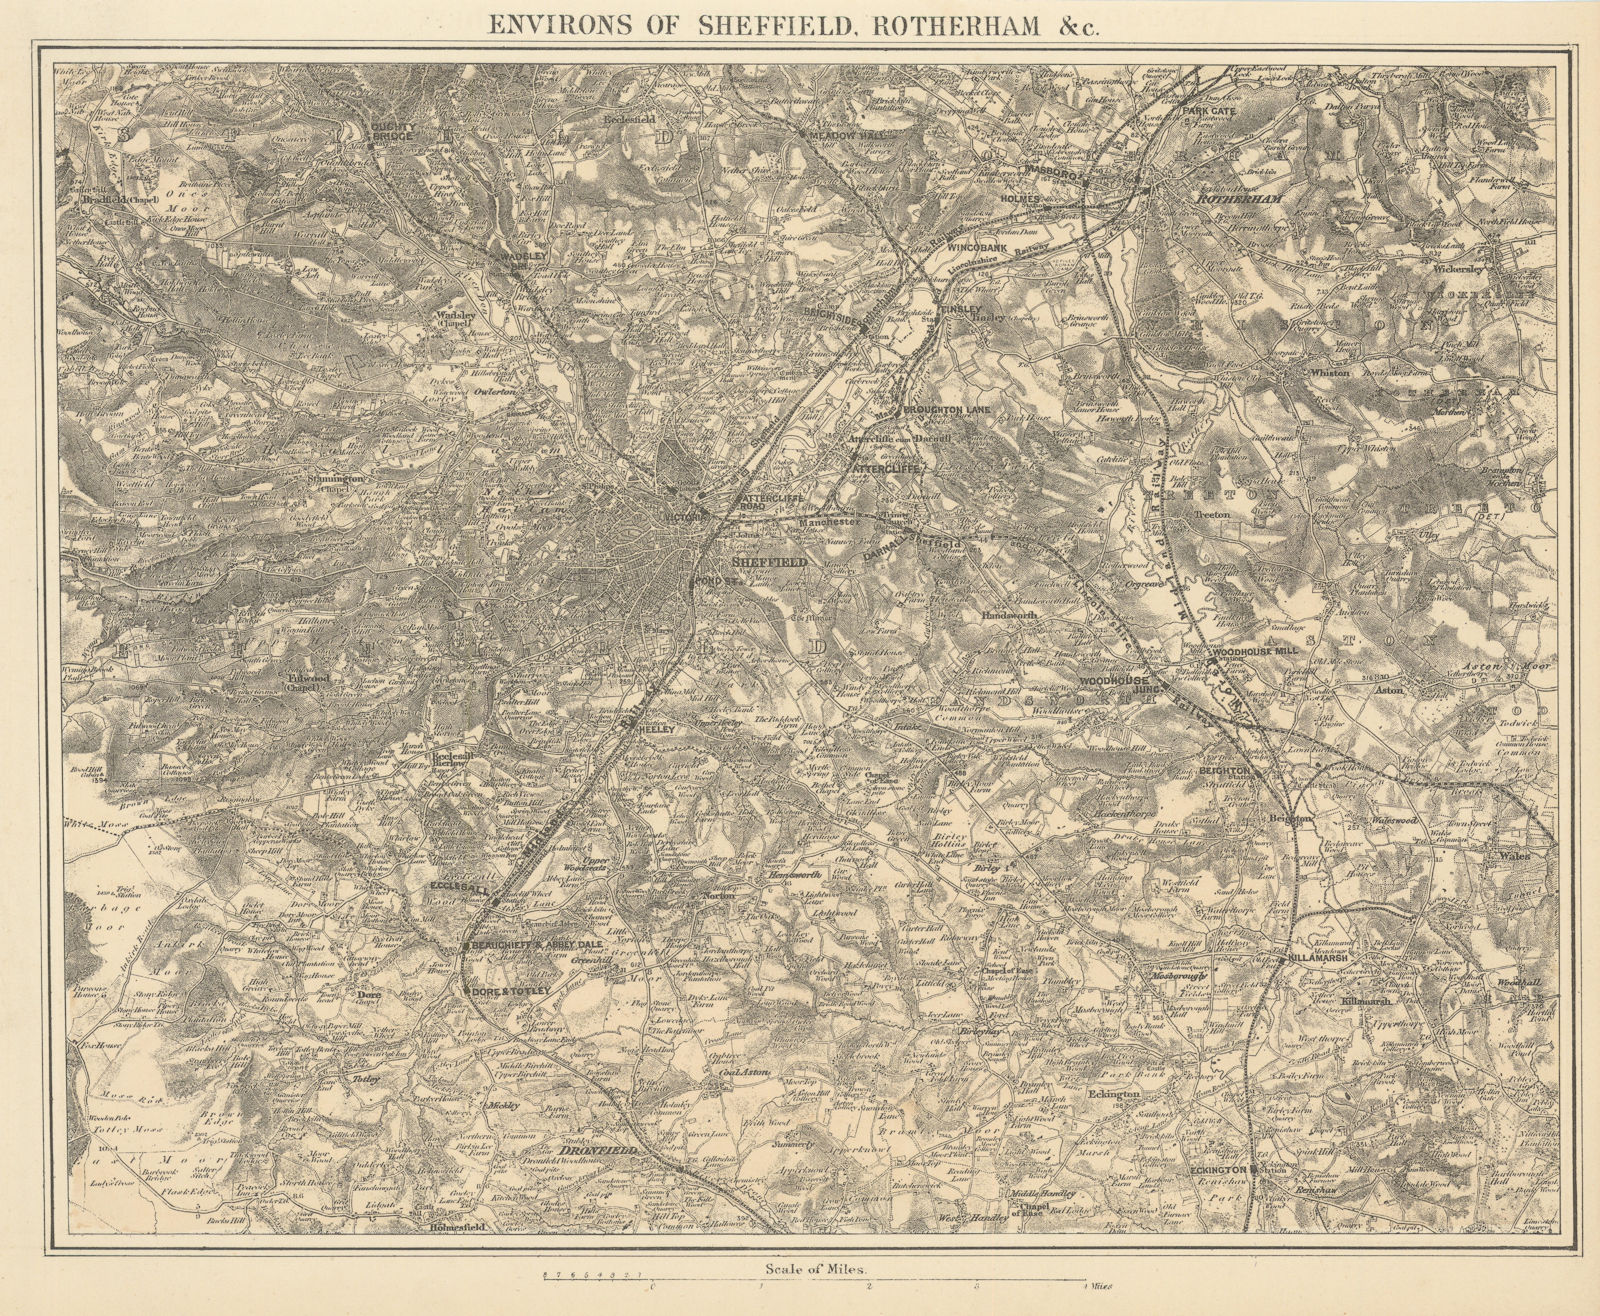 Associate Product SHEFFIELD, ROTHERHAM & environs. East Peak District. GW BACON 1883 old map